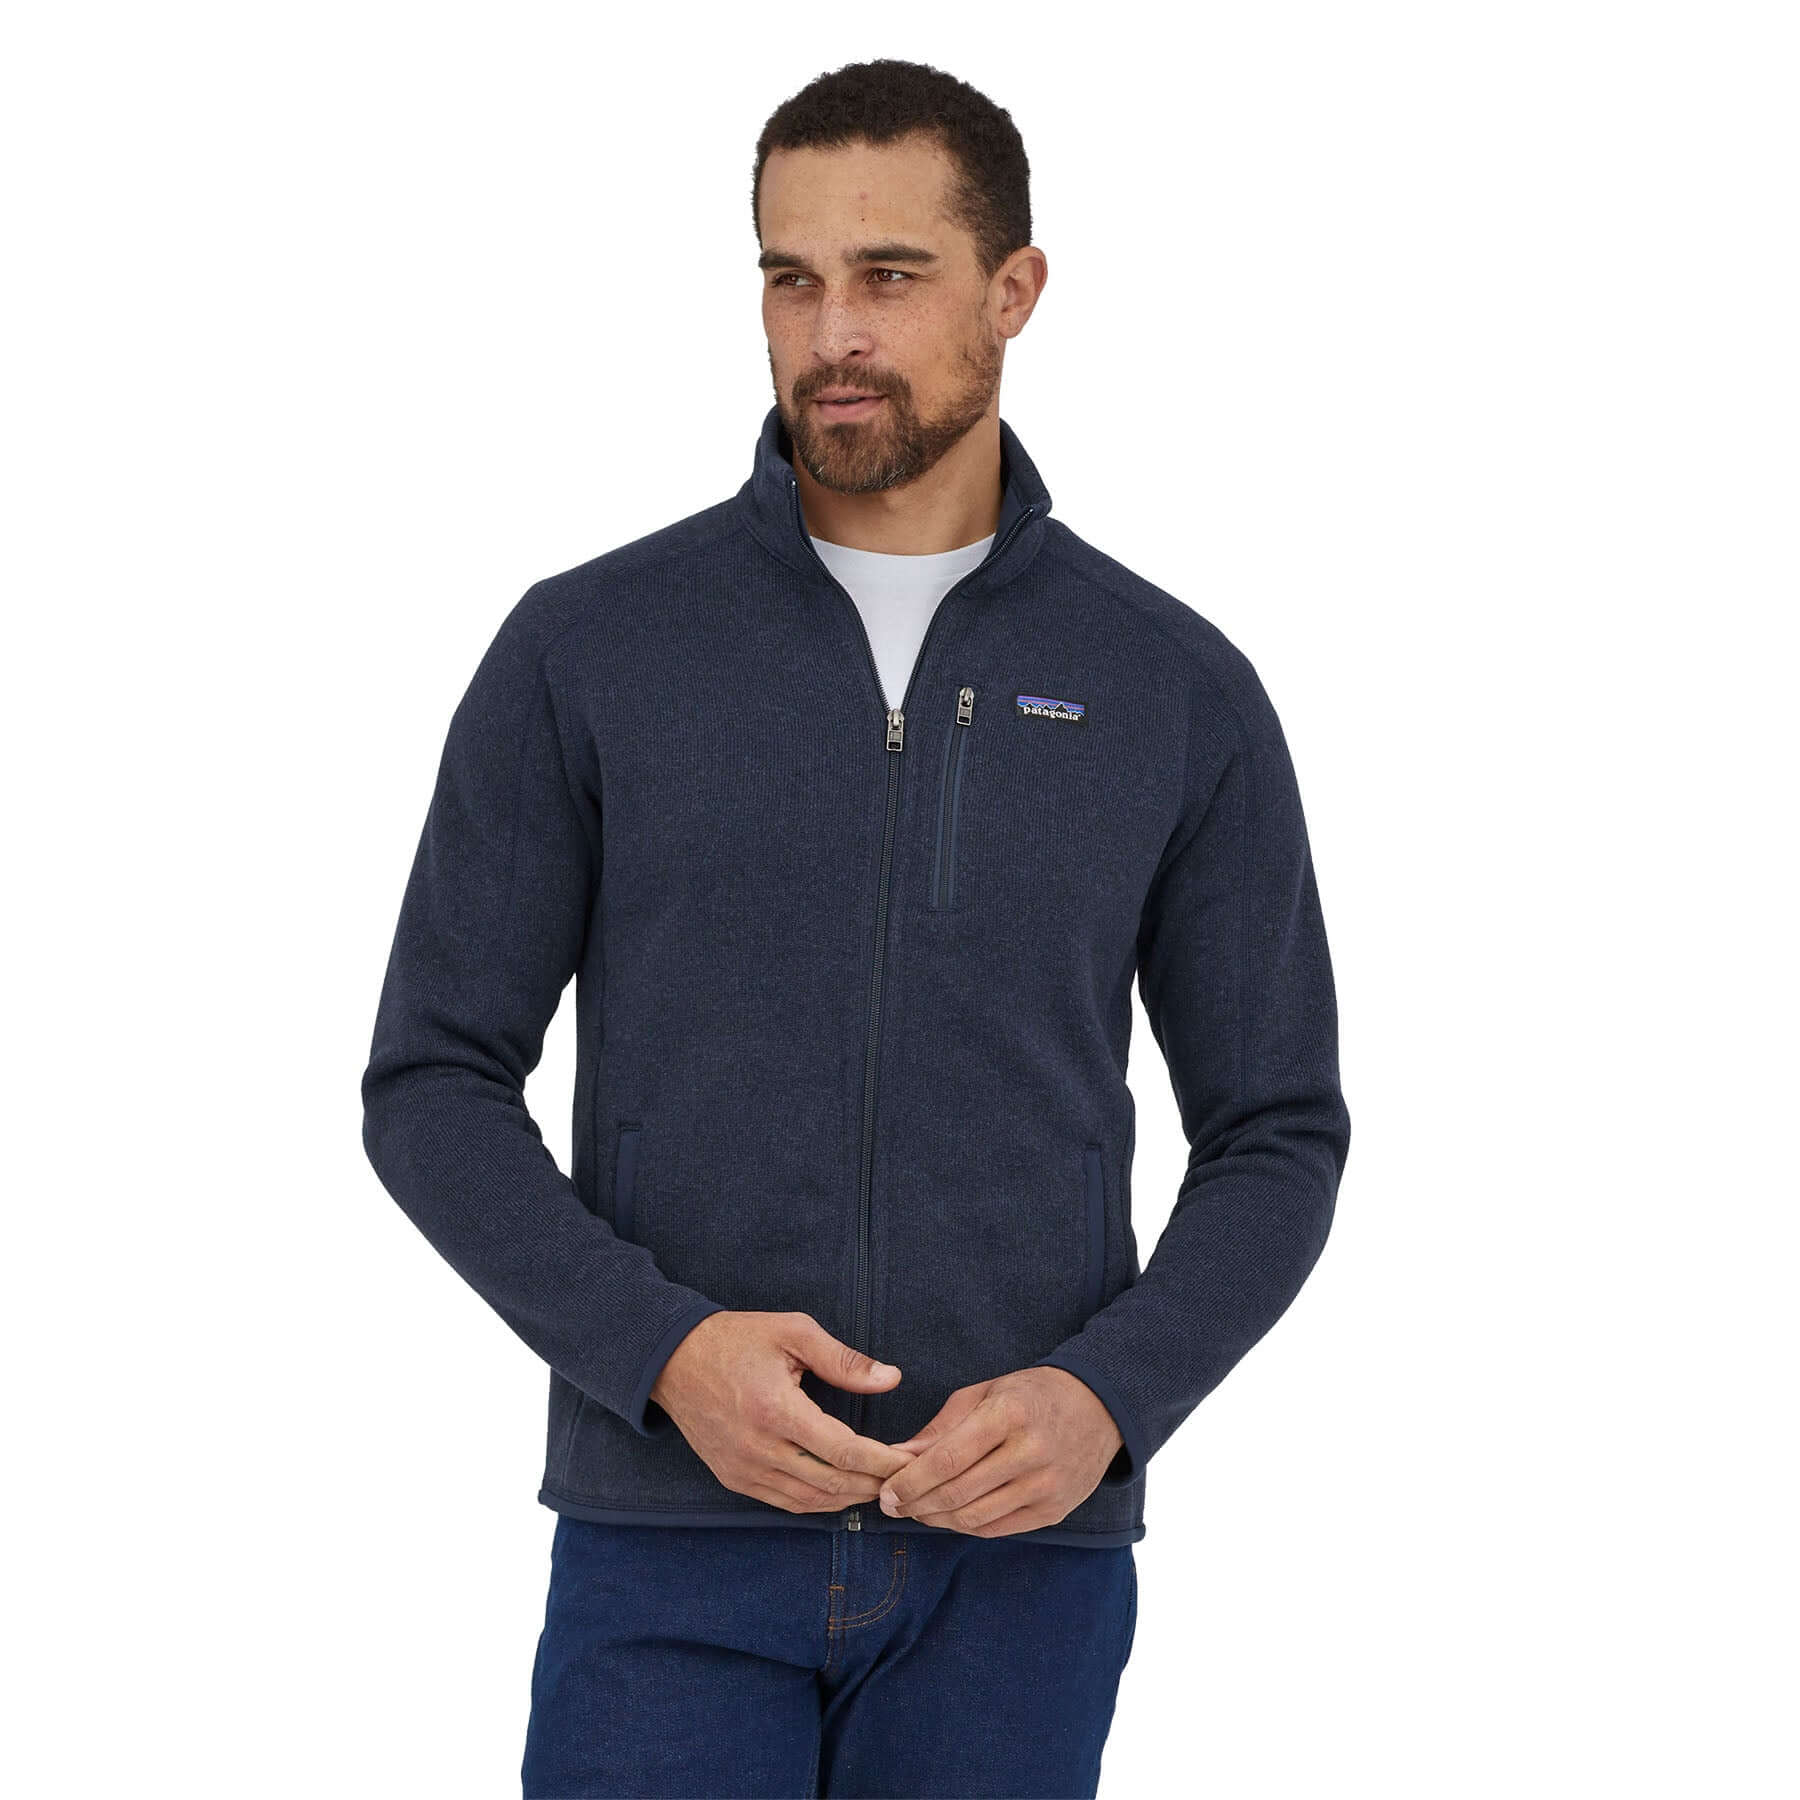 Men's Better Sweater Jacket in NEW NAVY | Patagonia Bend